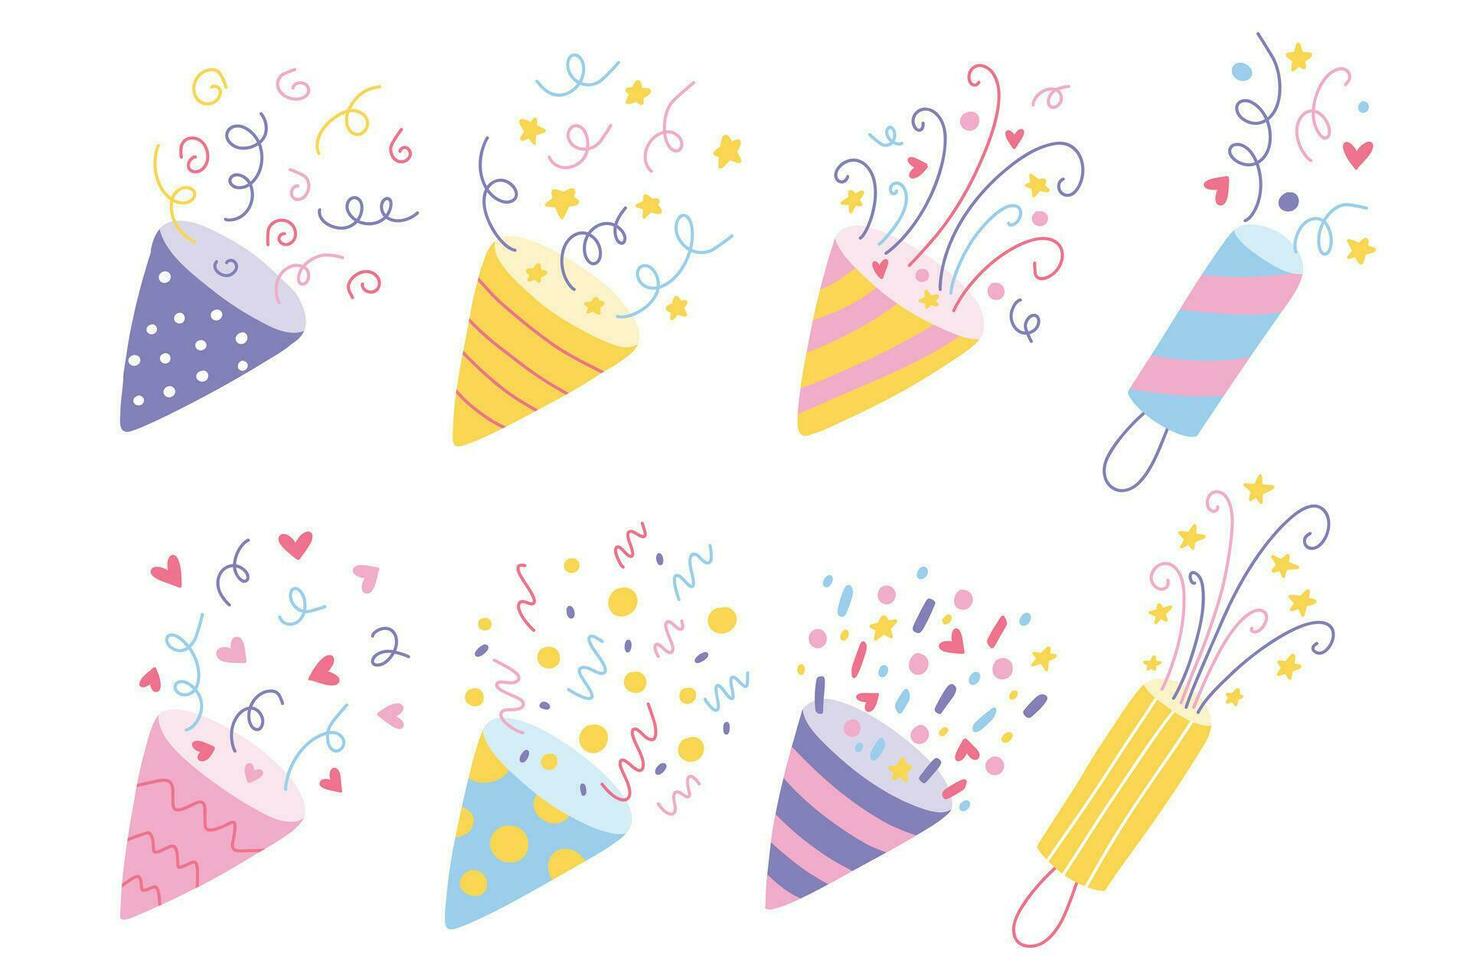 Party Confetti Popper Set. Collection of Isolated confetti, explosion, firecracker, celebration in hand drawn style. Vector illustration.